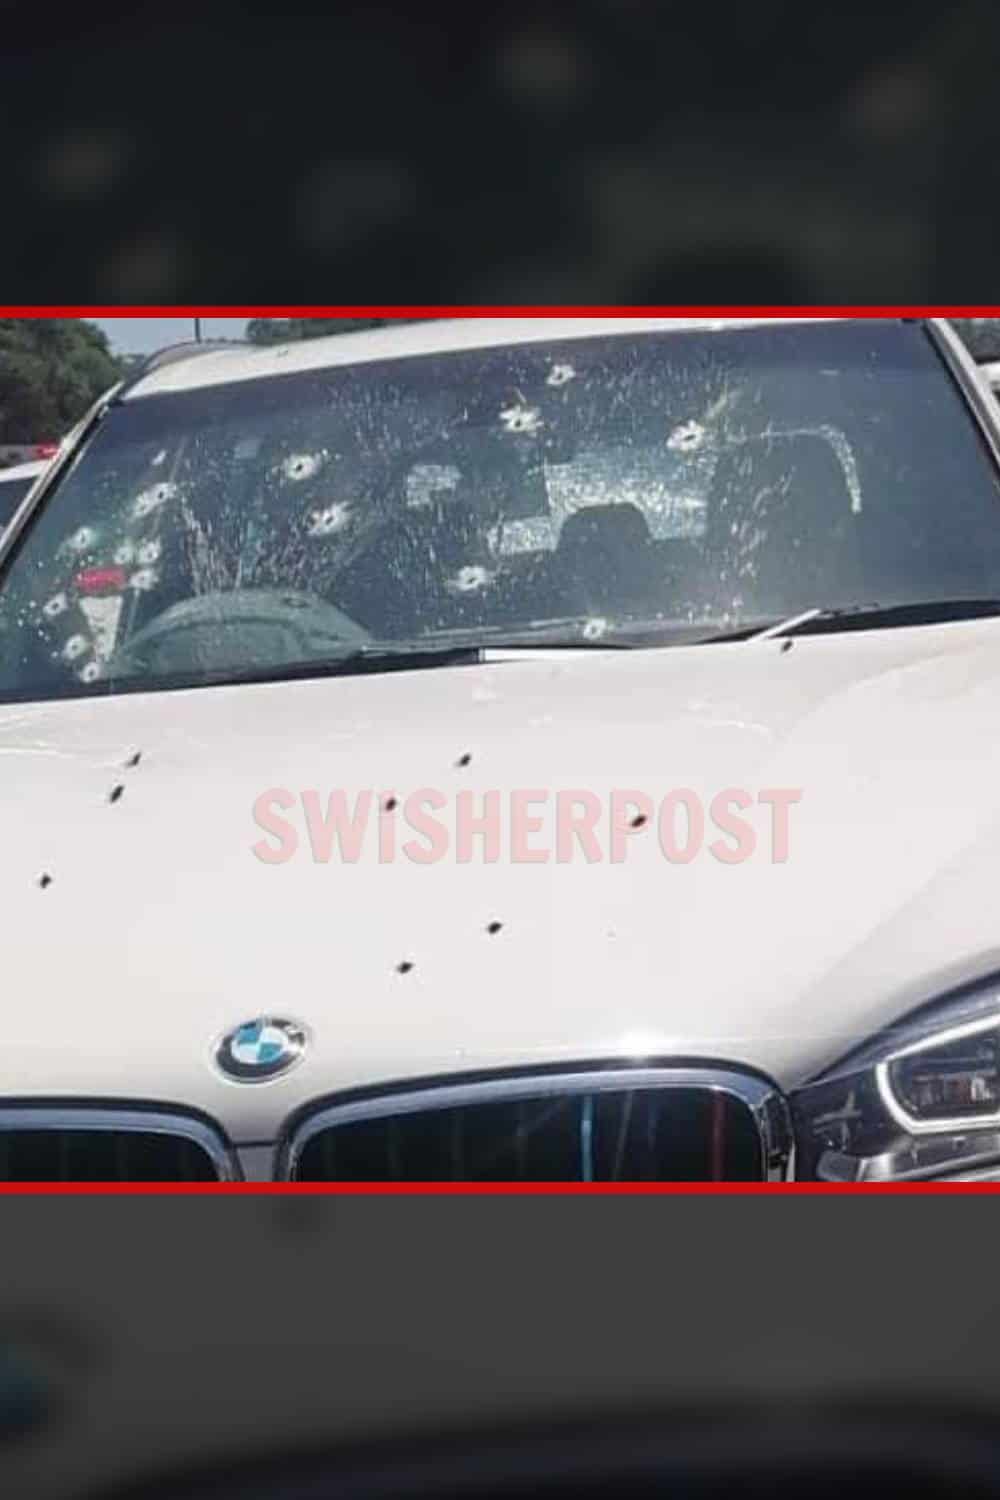 Springfield park drive-by shooting bmw x5 bullet holes